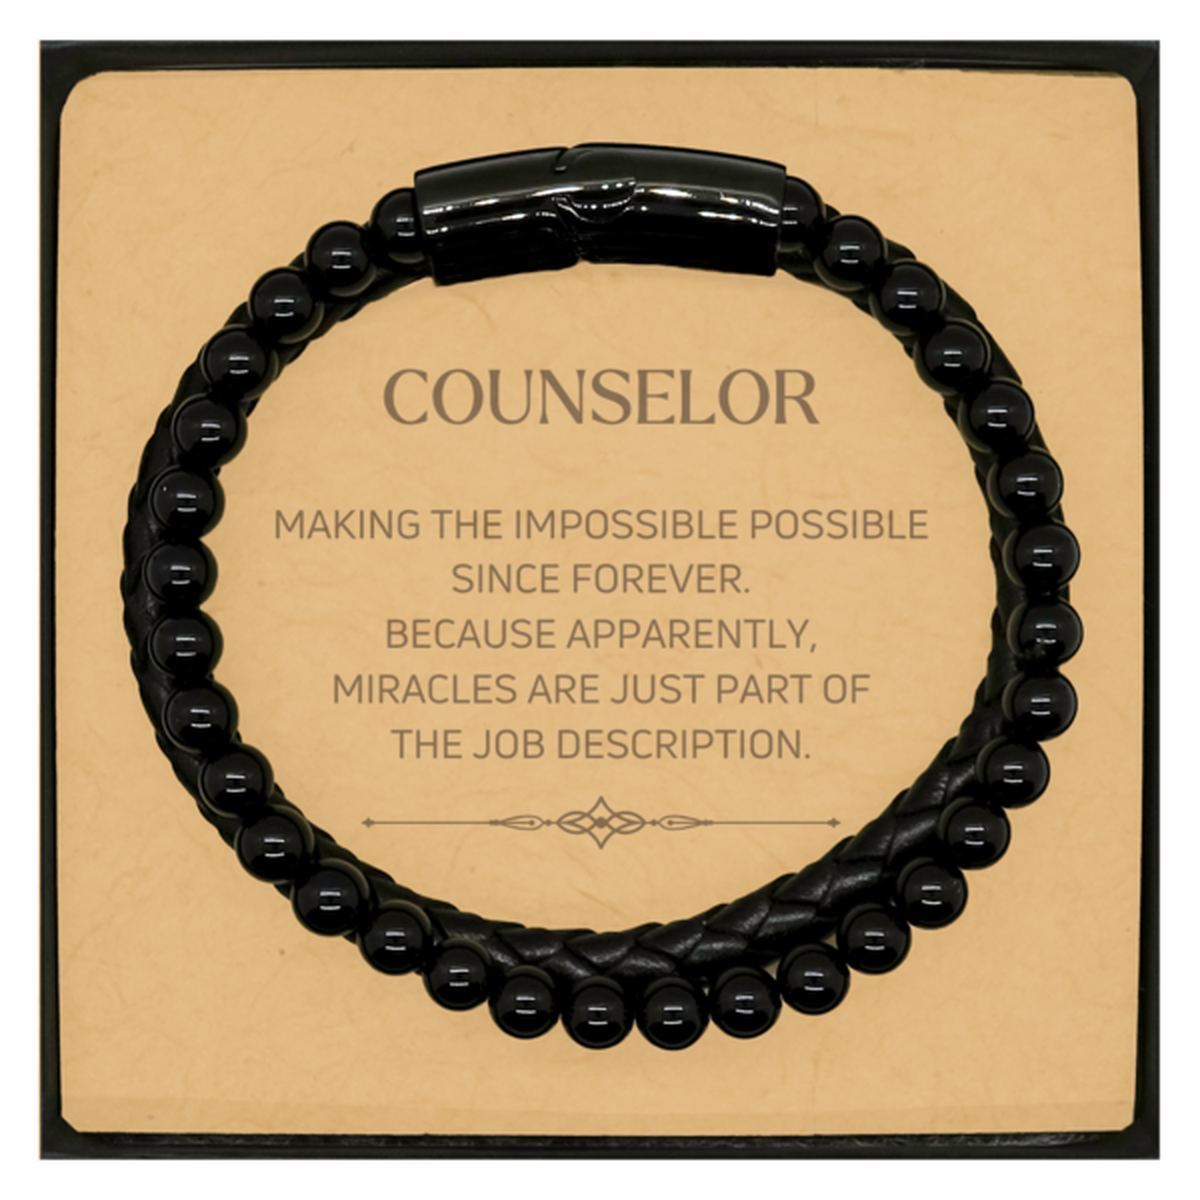 Funny Counselor Gifts, Miracles are just part of the job description, Inspirational Birthday Christmas Stone Leather Bracelets For Counselor, Men, Women, Coworkers, Friends, Boss